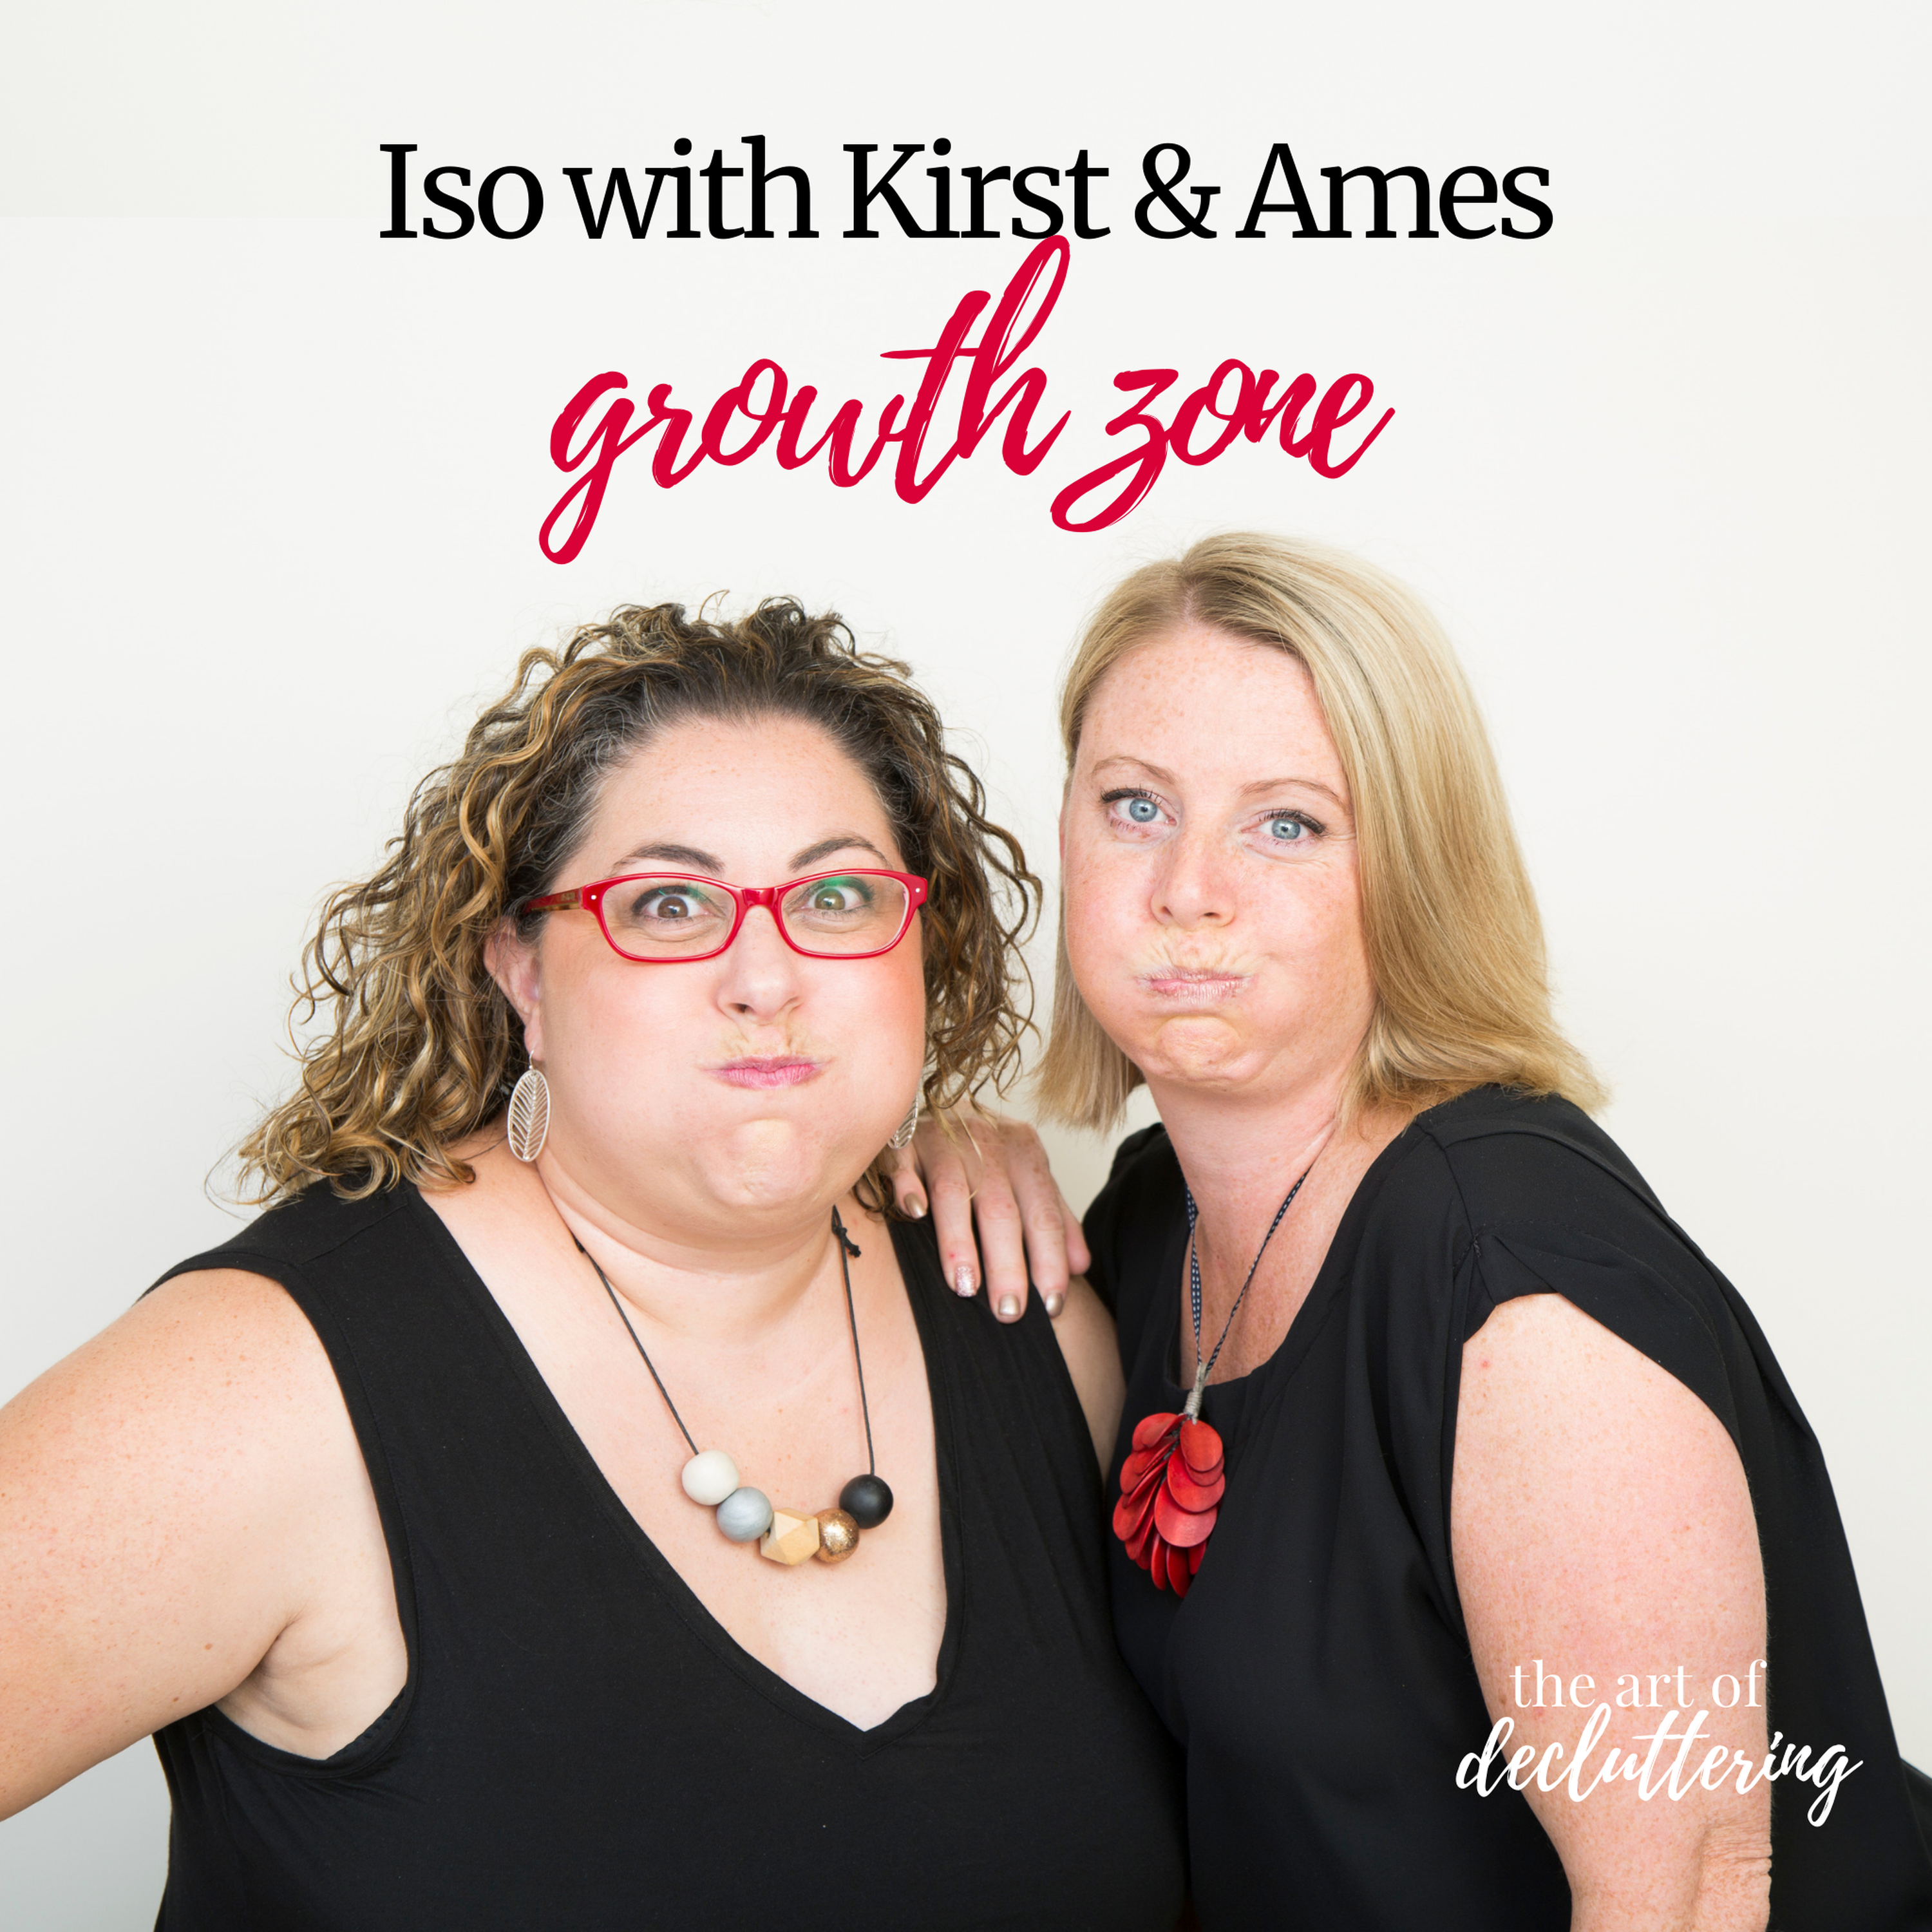 Iso with Kirst & Ames - Growth Zone